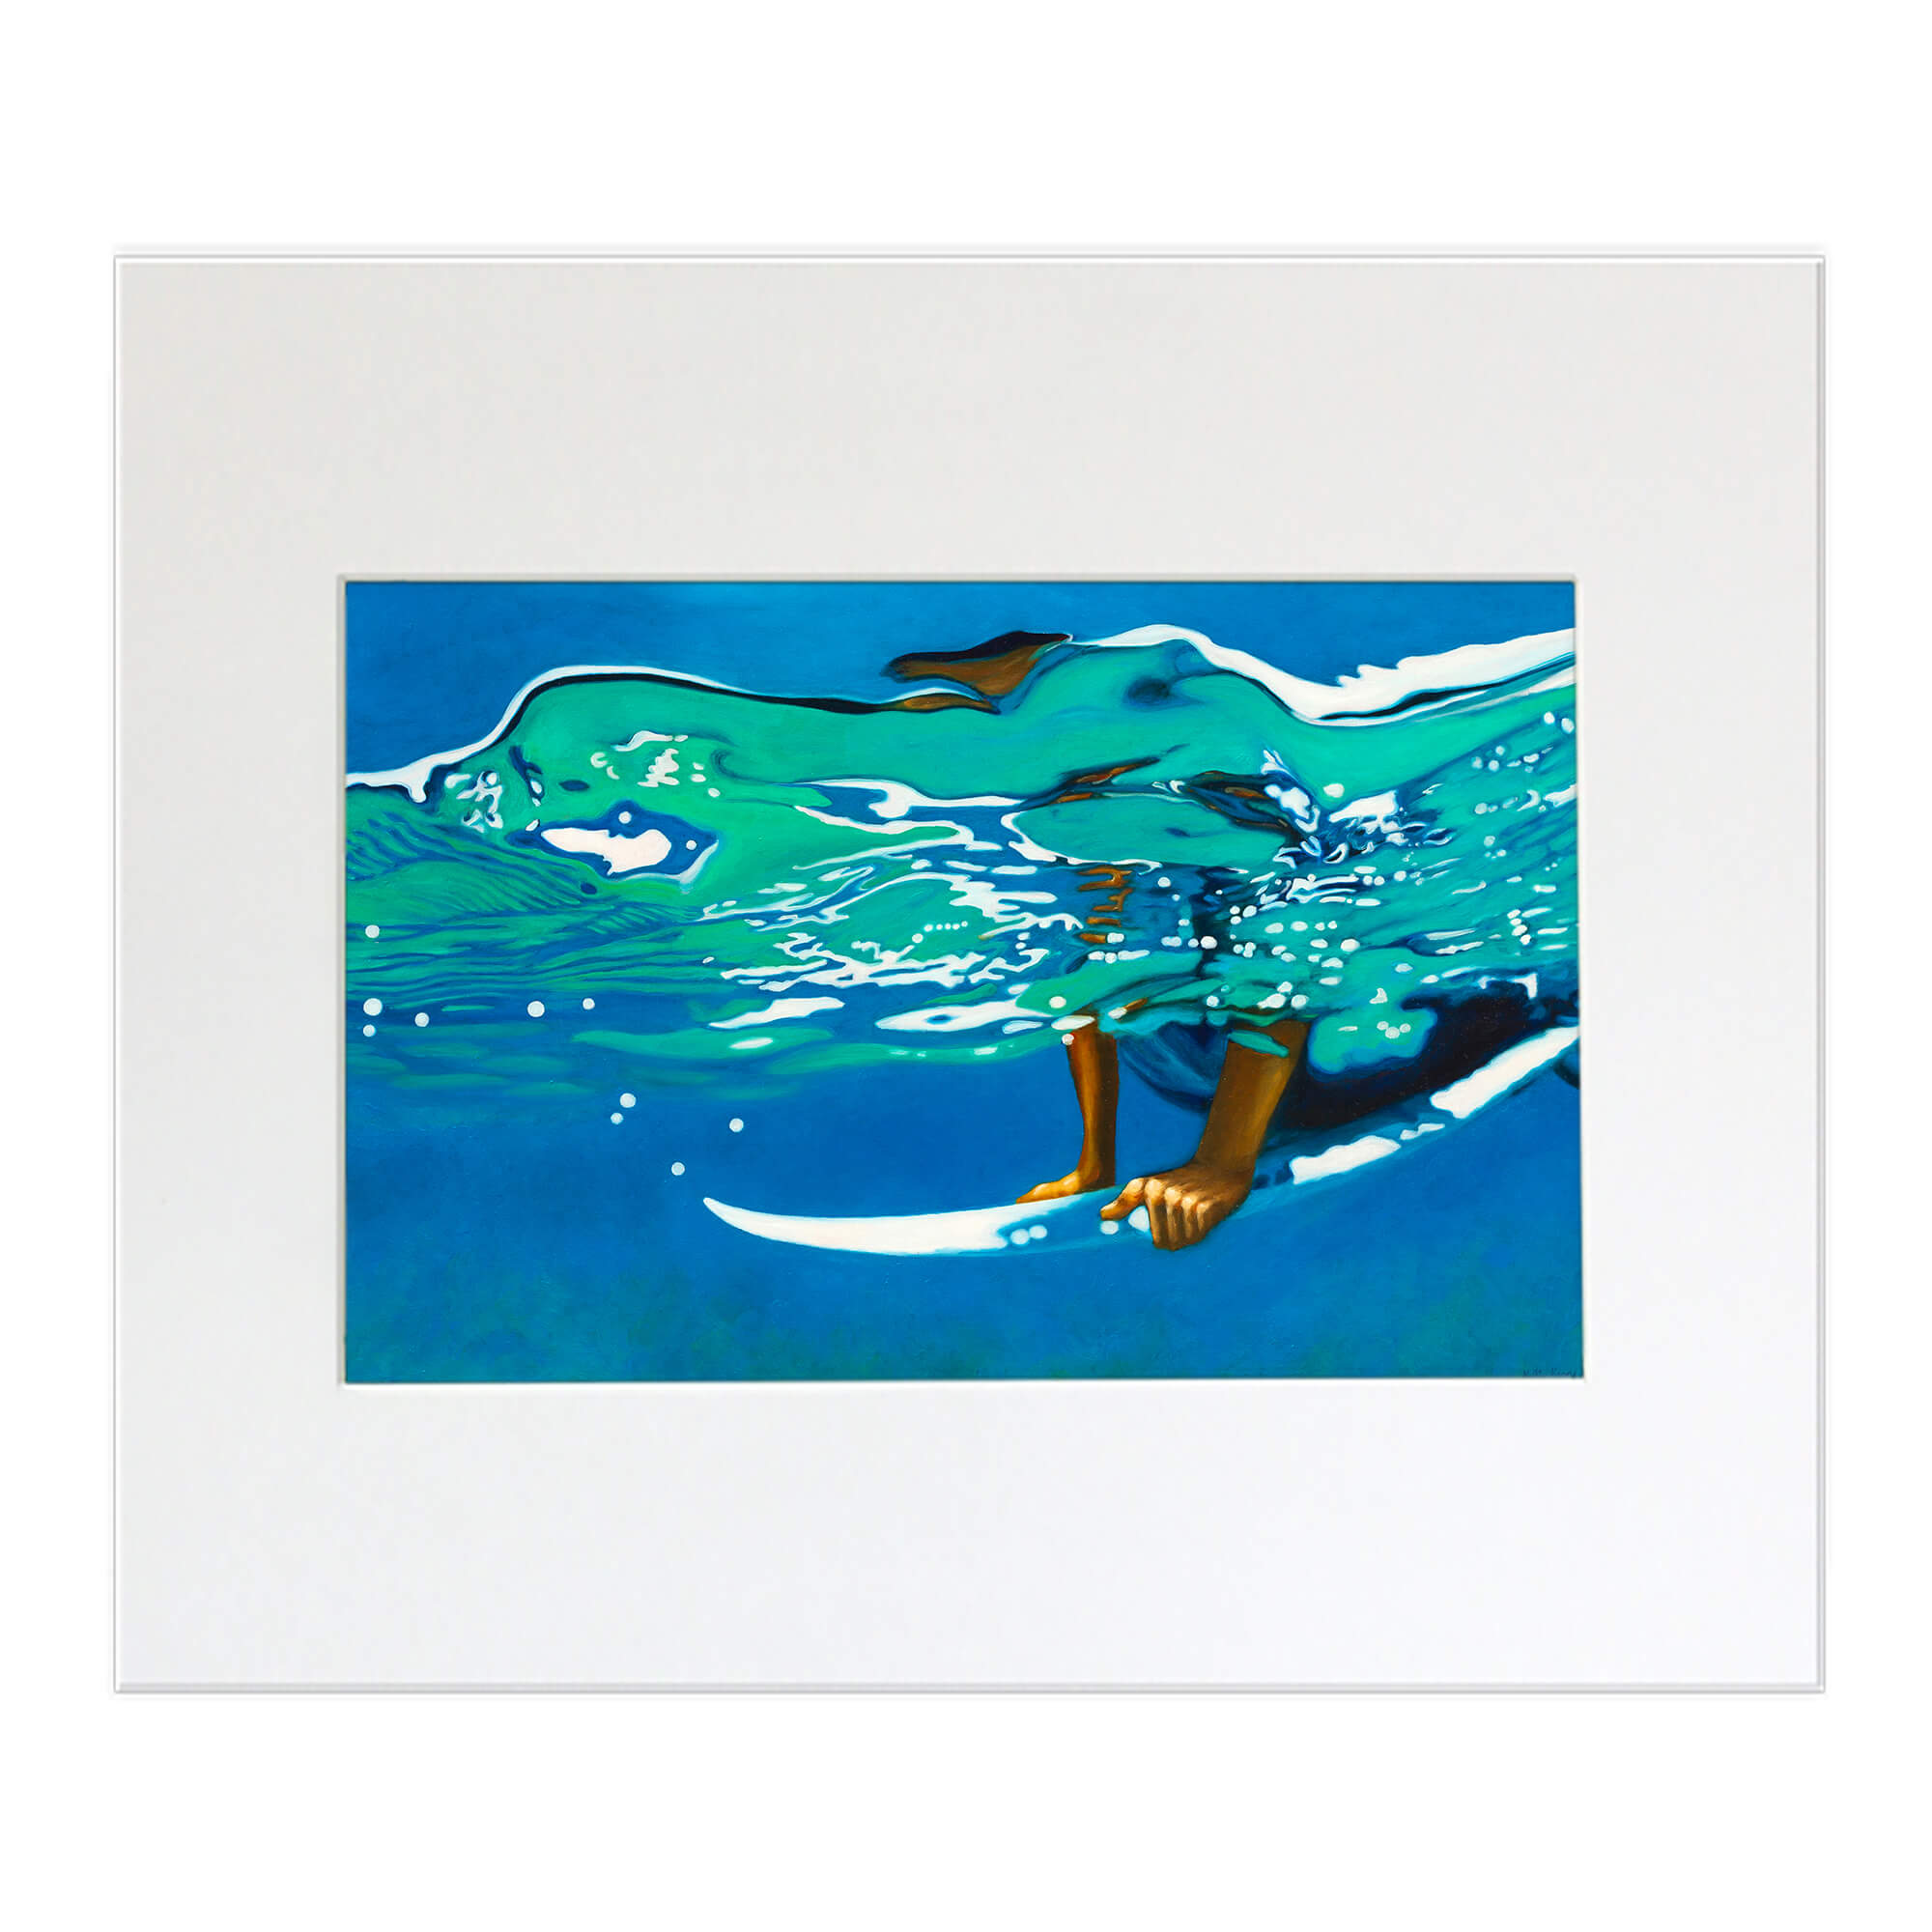 Matted art print depicting a person surfing in the calm sea  by hawaii artist Kelly Keane